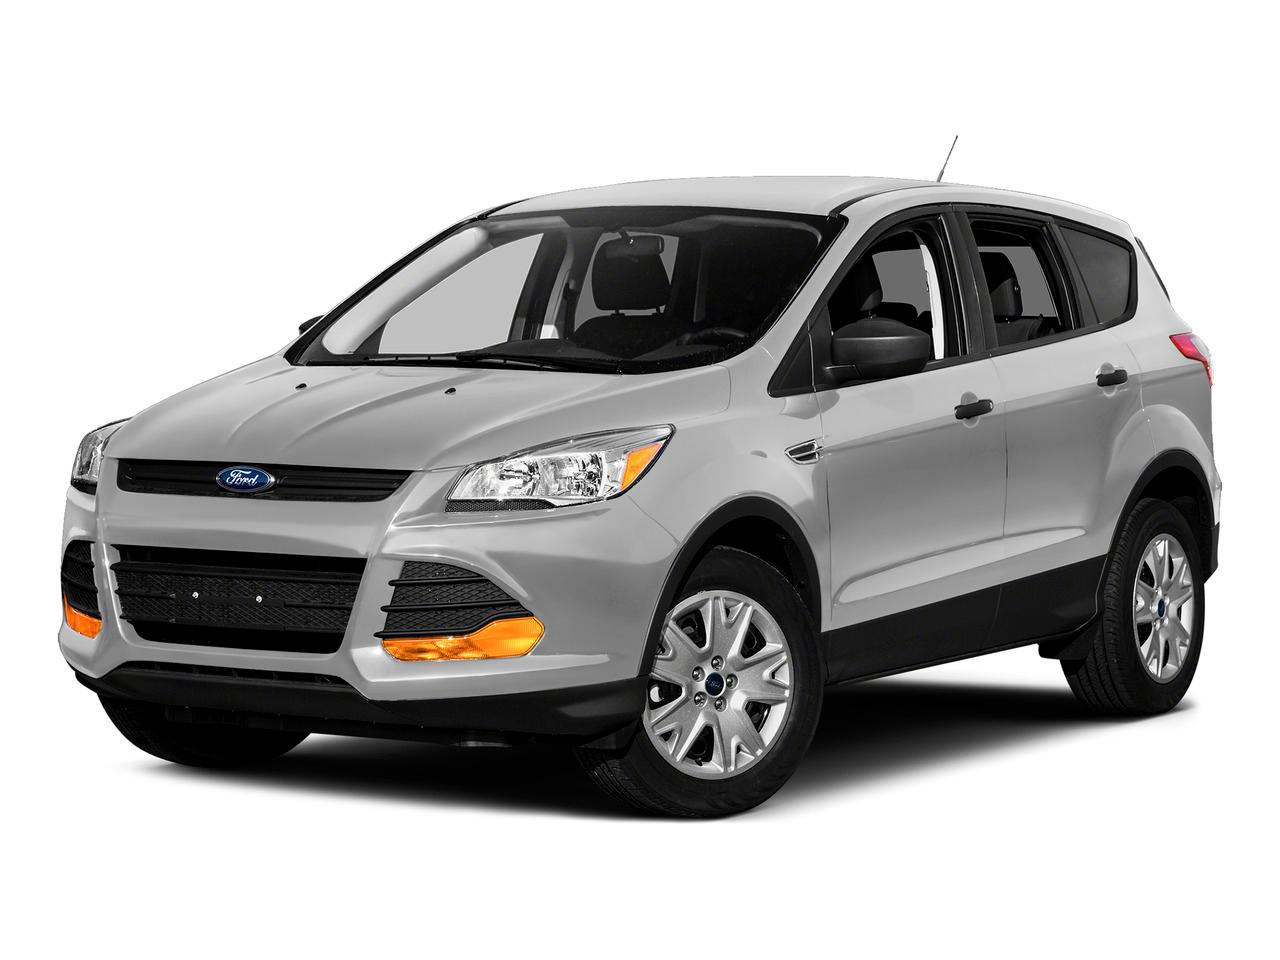 2015 Ford Escape Vehicle Photo in Saint Charles, IL 60174